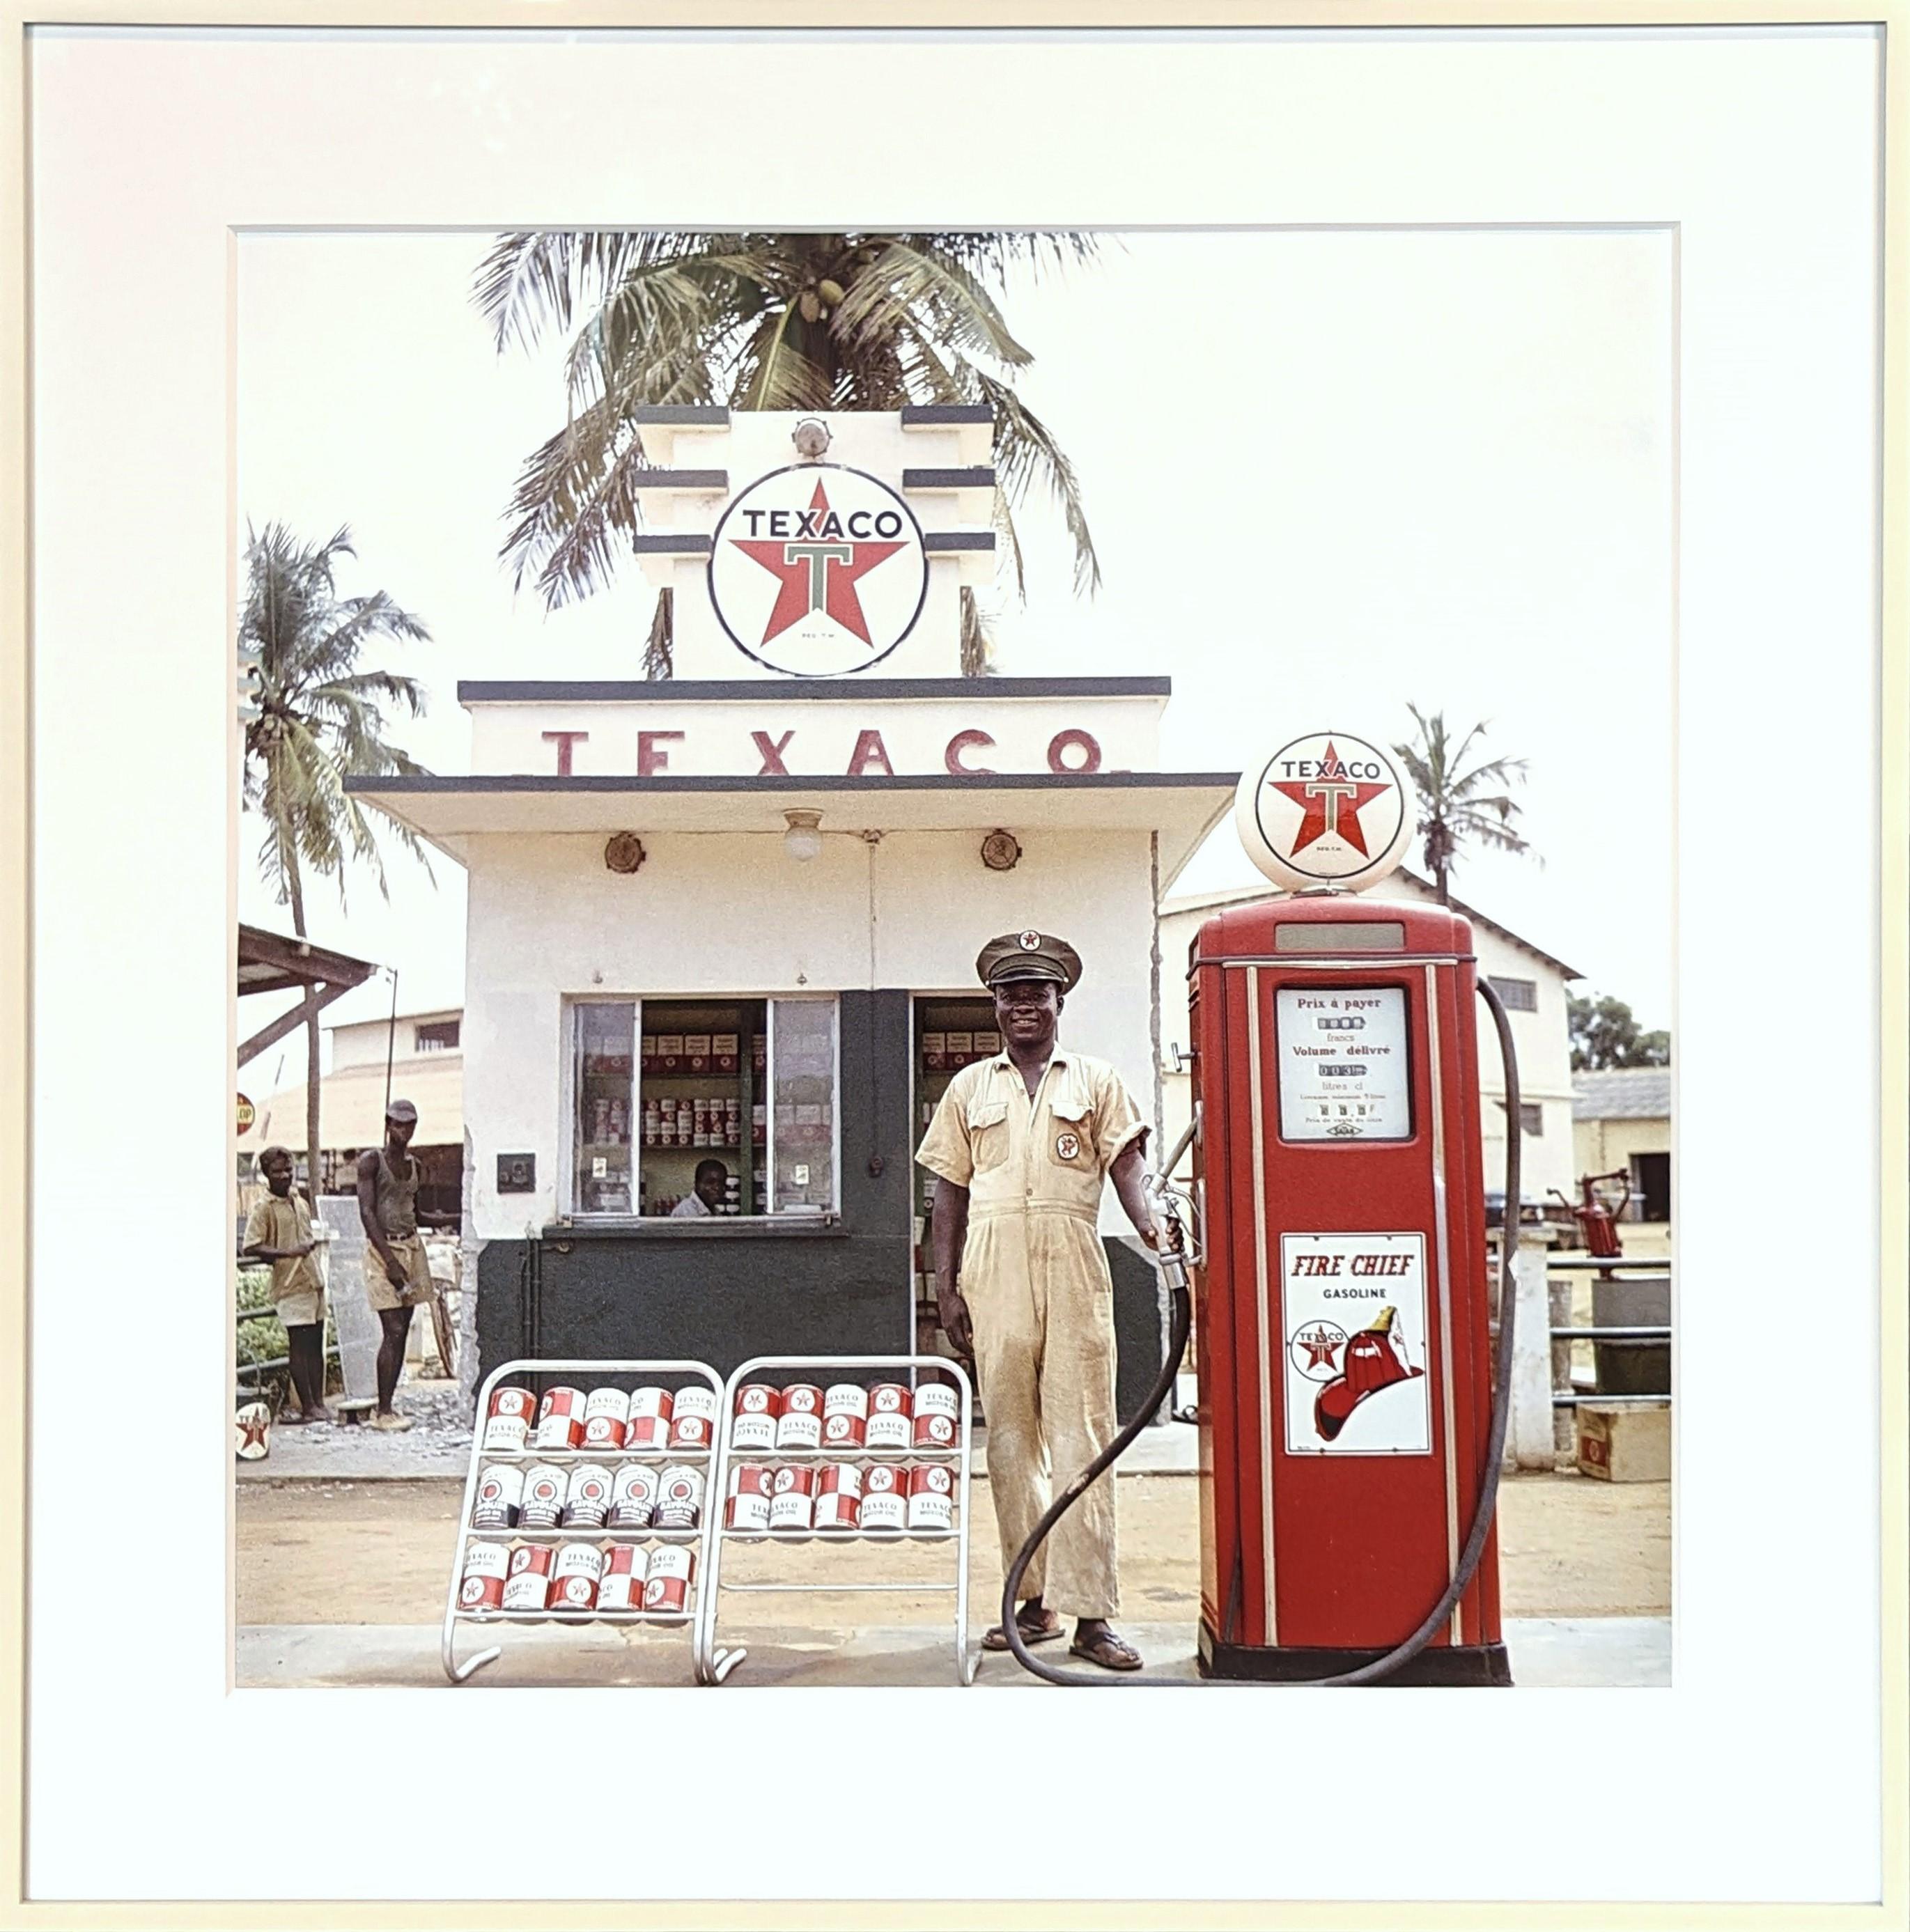 Photographed in 1958 on the African continent, this image is one of the first large scale examples of color photography created by Todd Webb, a leading figure in the early photographic cooperative known as Magnum Photo. This work is edition 1 of 10